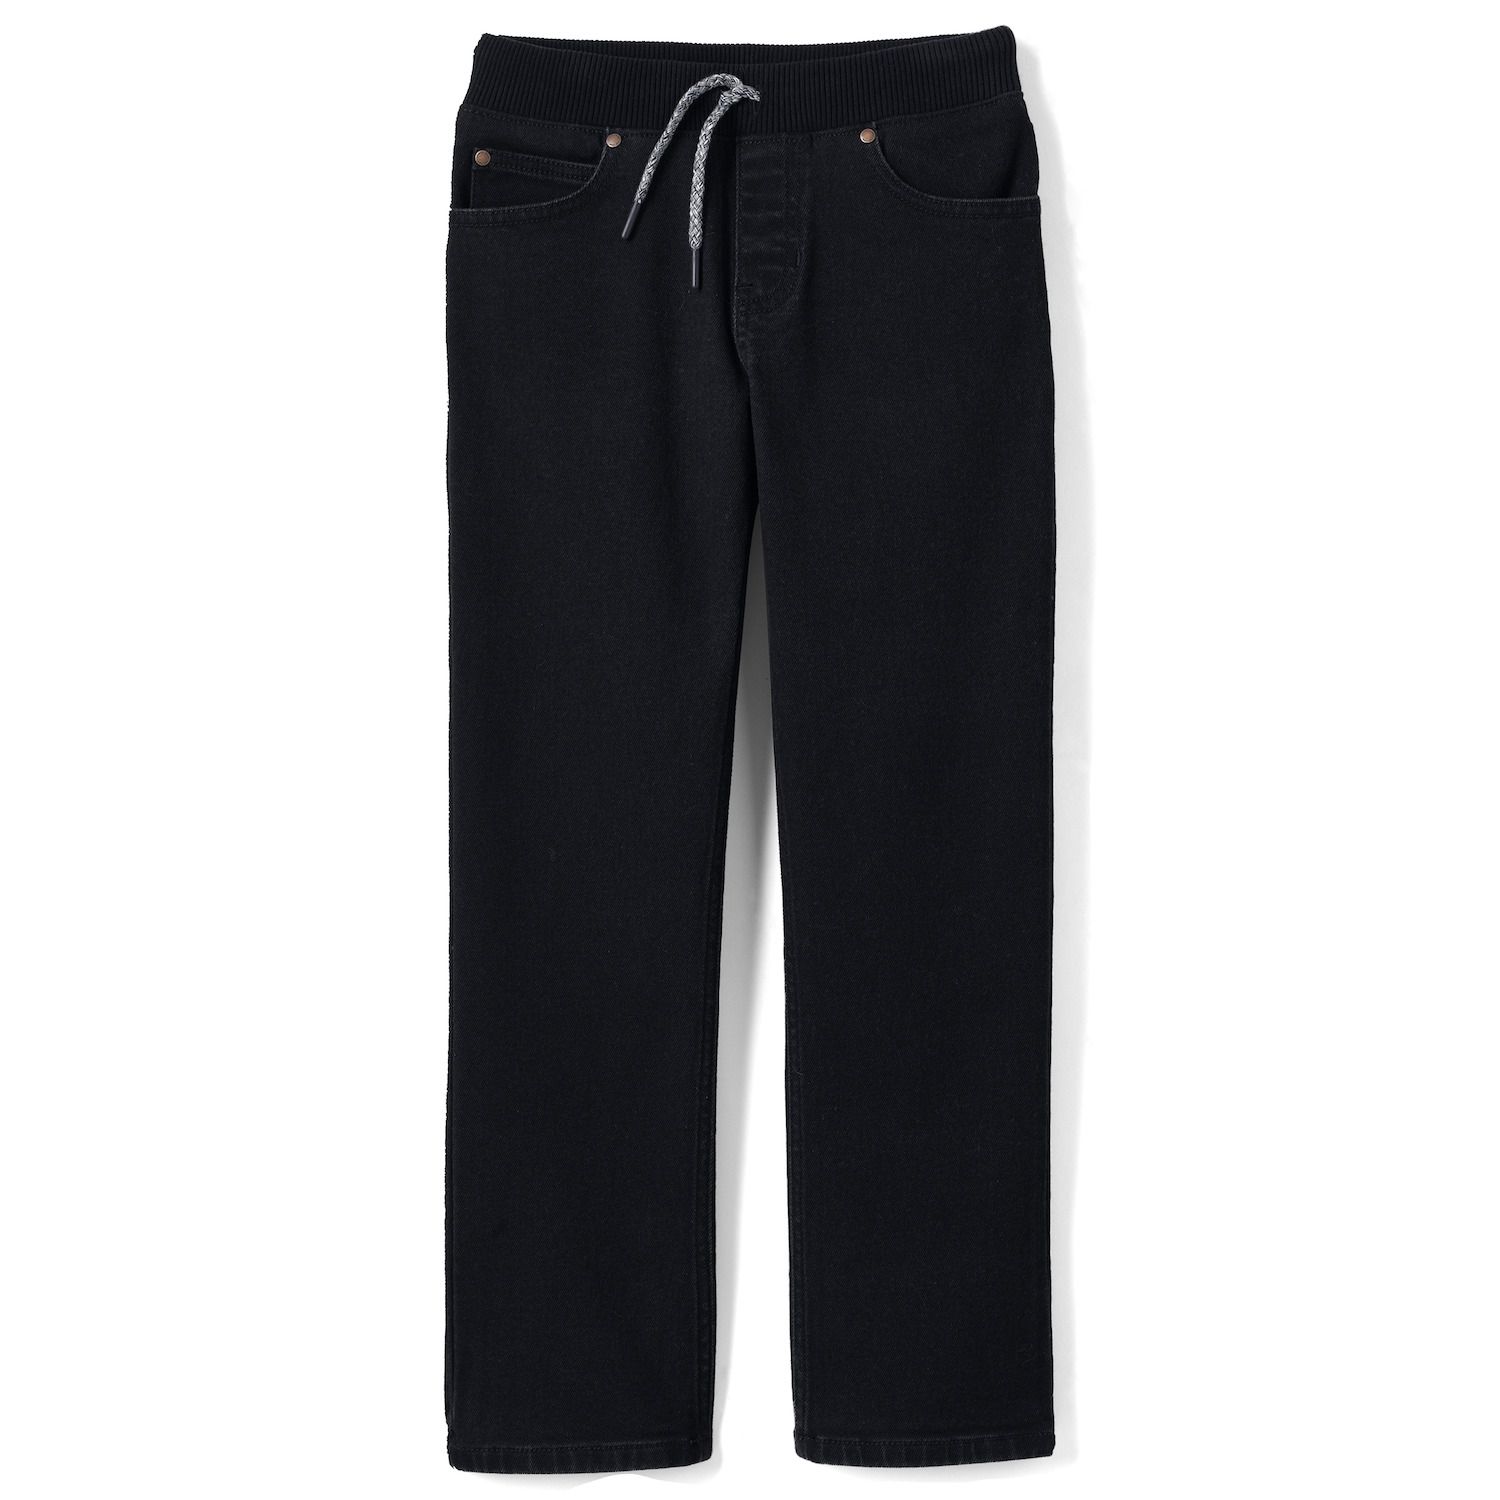 stretch pull on jeans